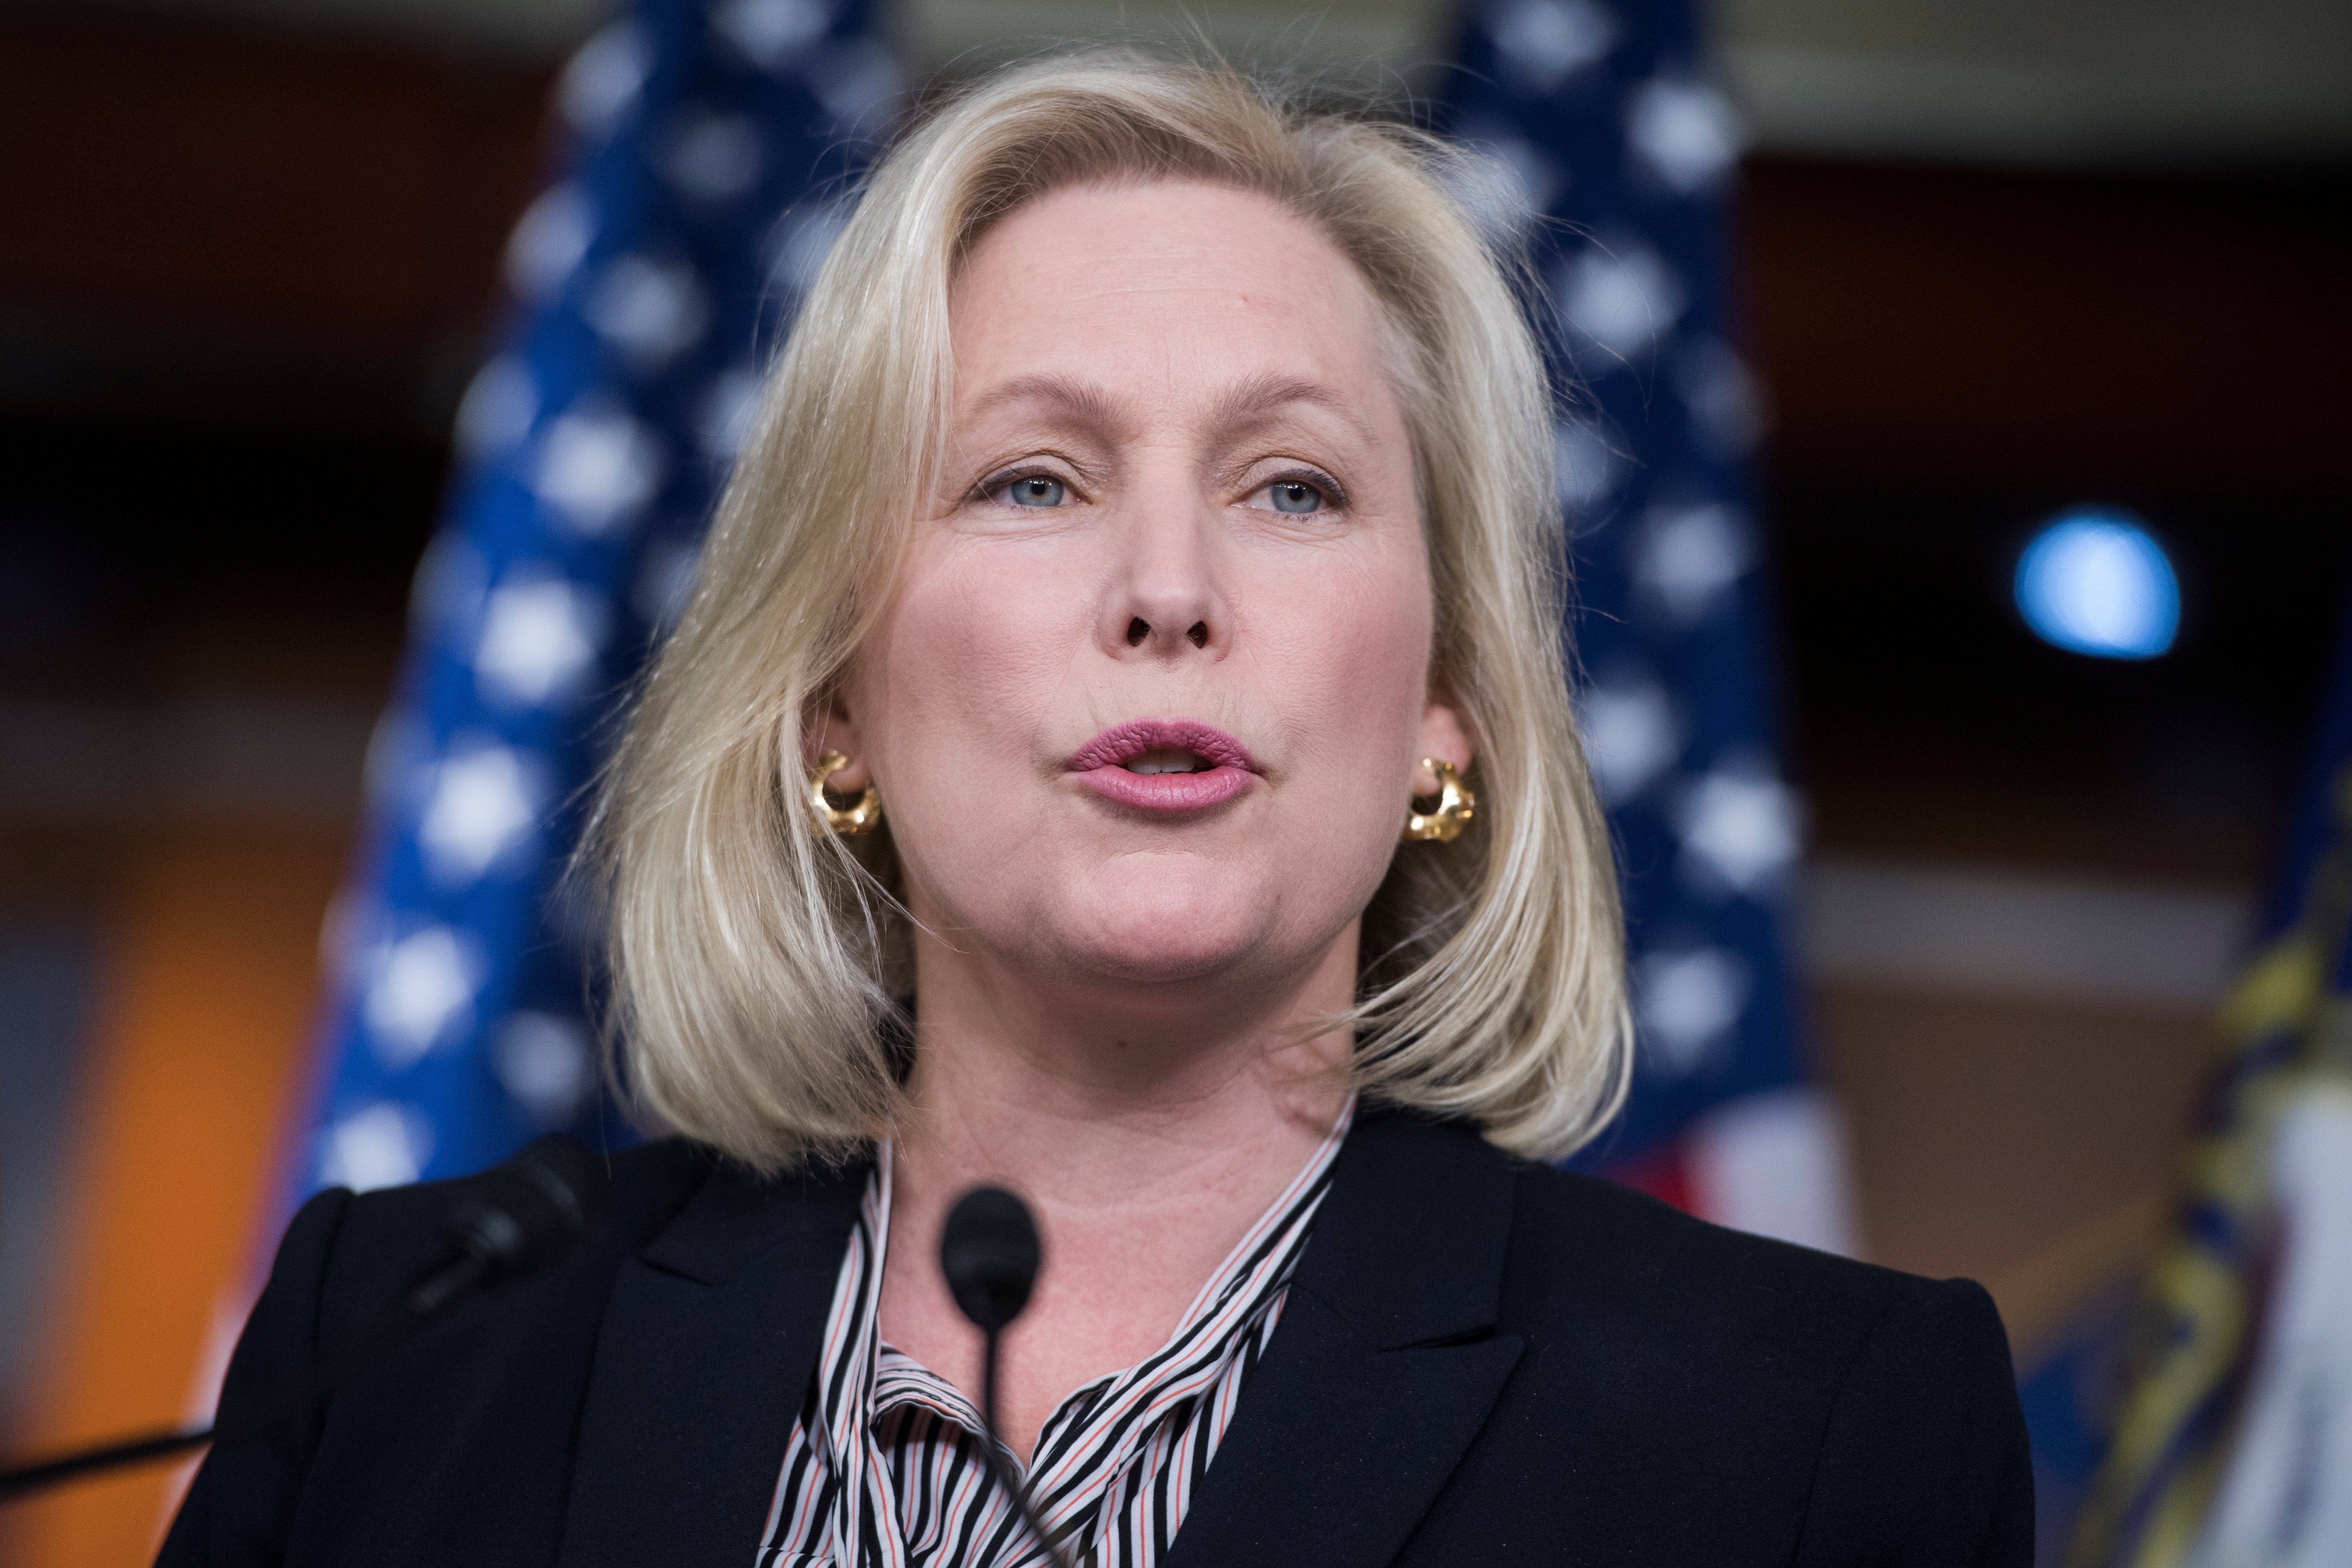 ‘I’m Not Going to Be Silenced.’ Sen. Kirsten Gillibrand Speaks Out After President Trump’s ‘Sexist Smear’